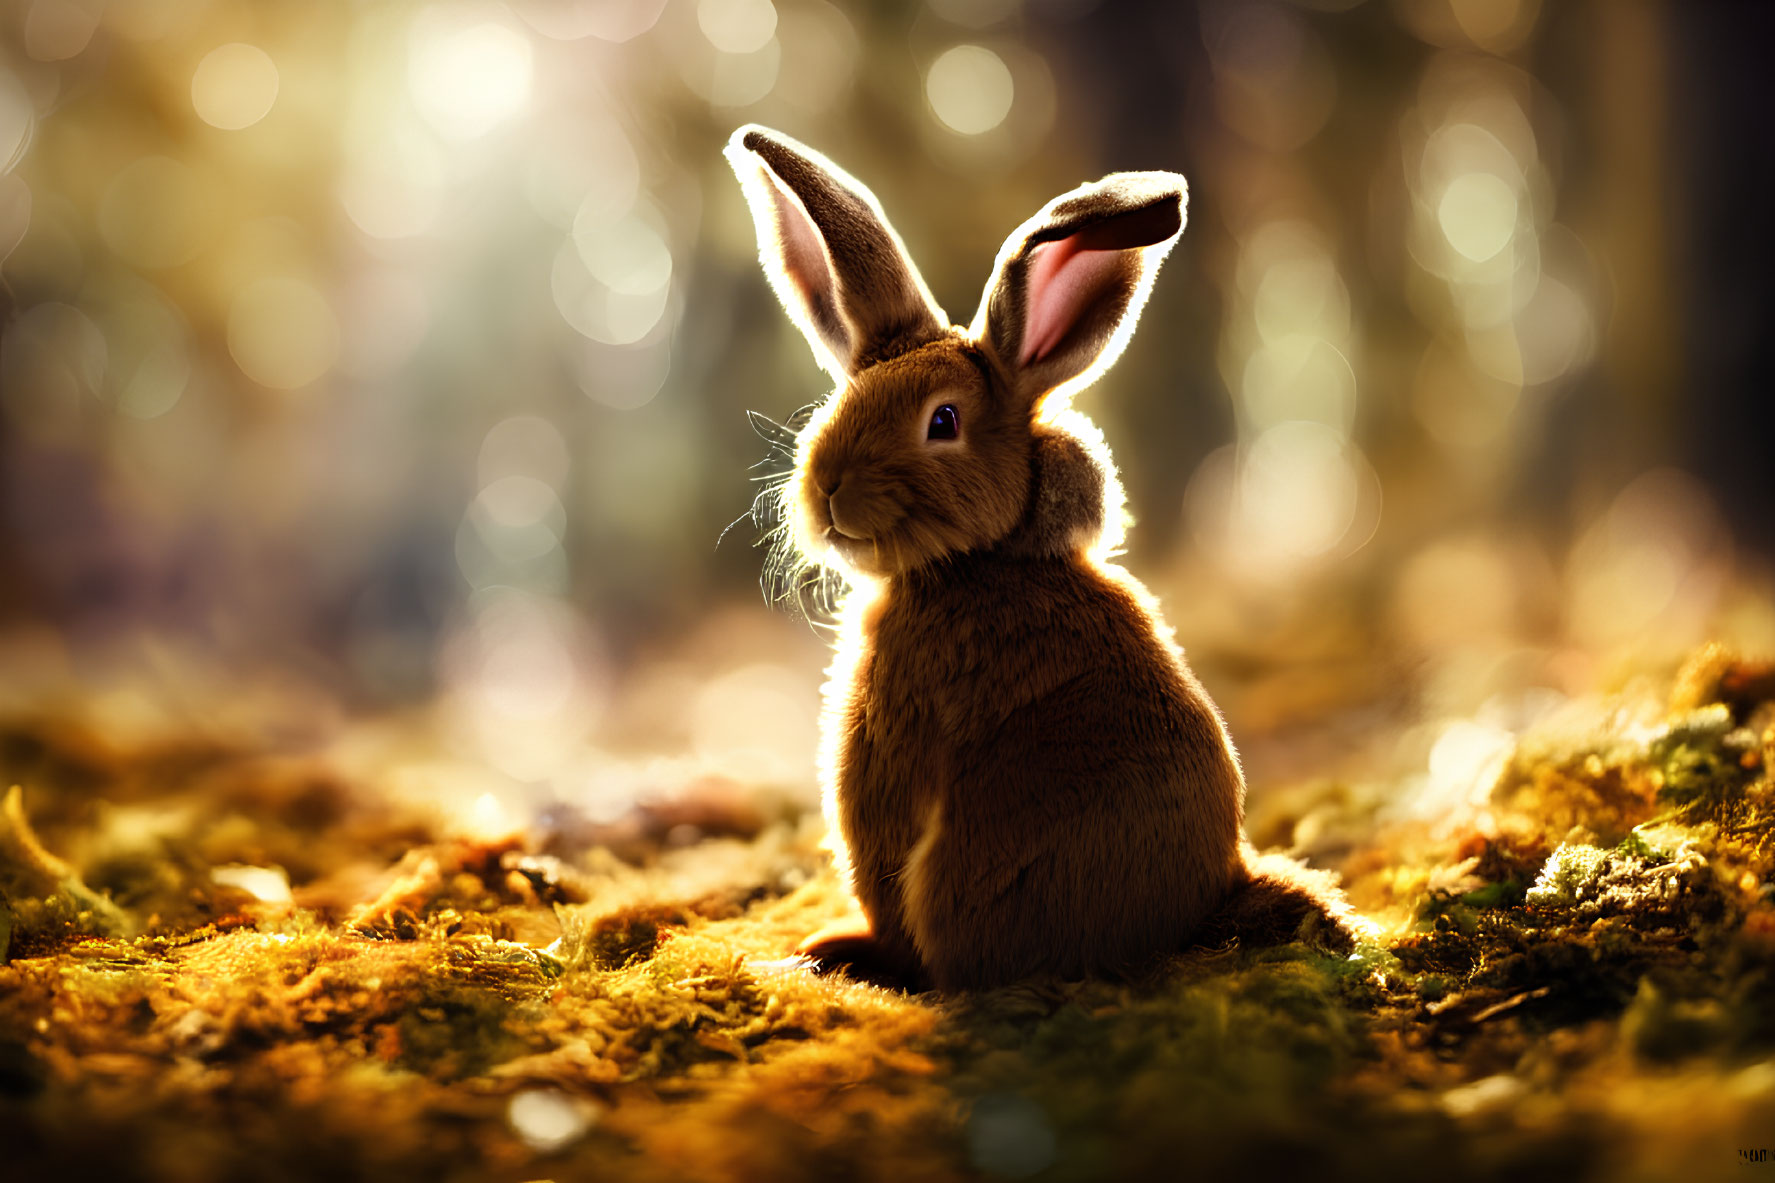 Brown Rabbit Sitting in Forest Sunlight with Bokeh Background